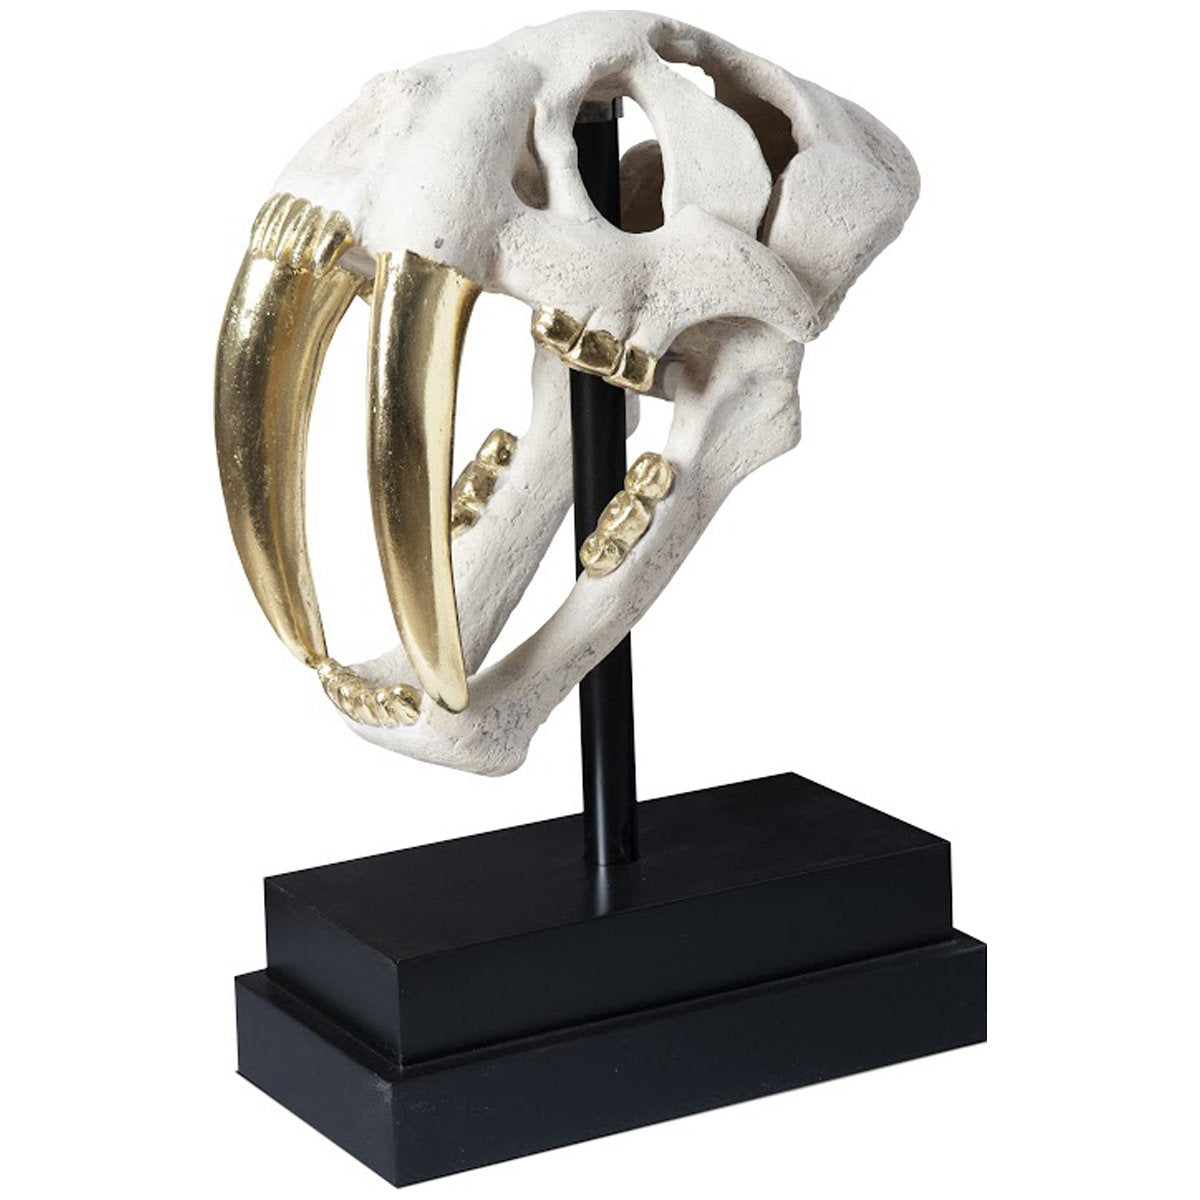 Phillips Collection Saber Tooth Tiger Skull Sculpture, Roman Stone